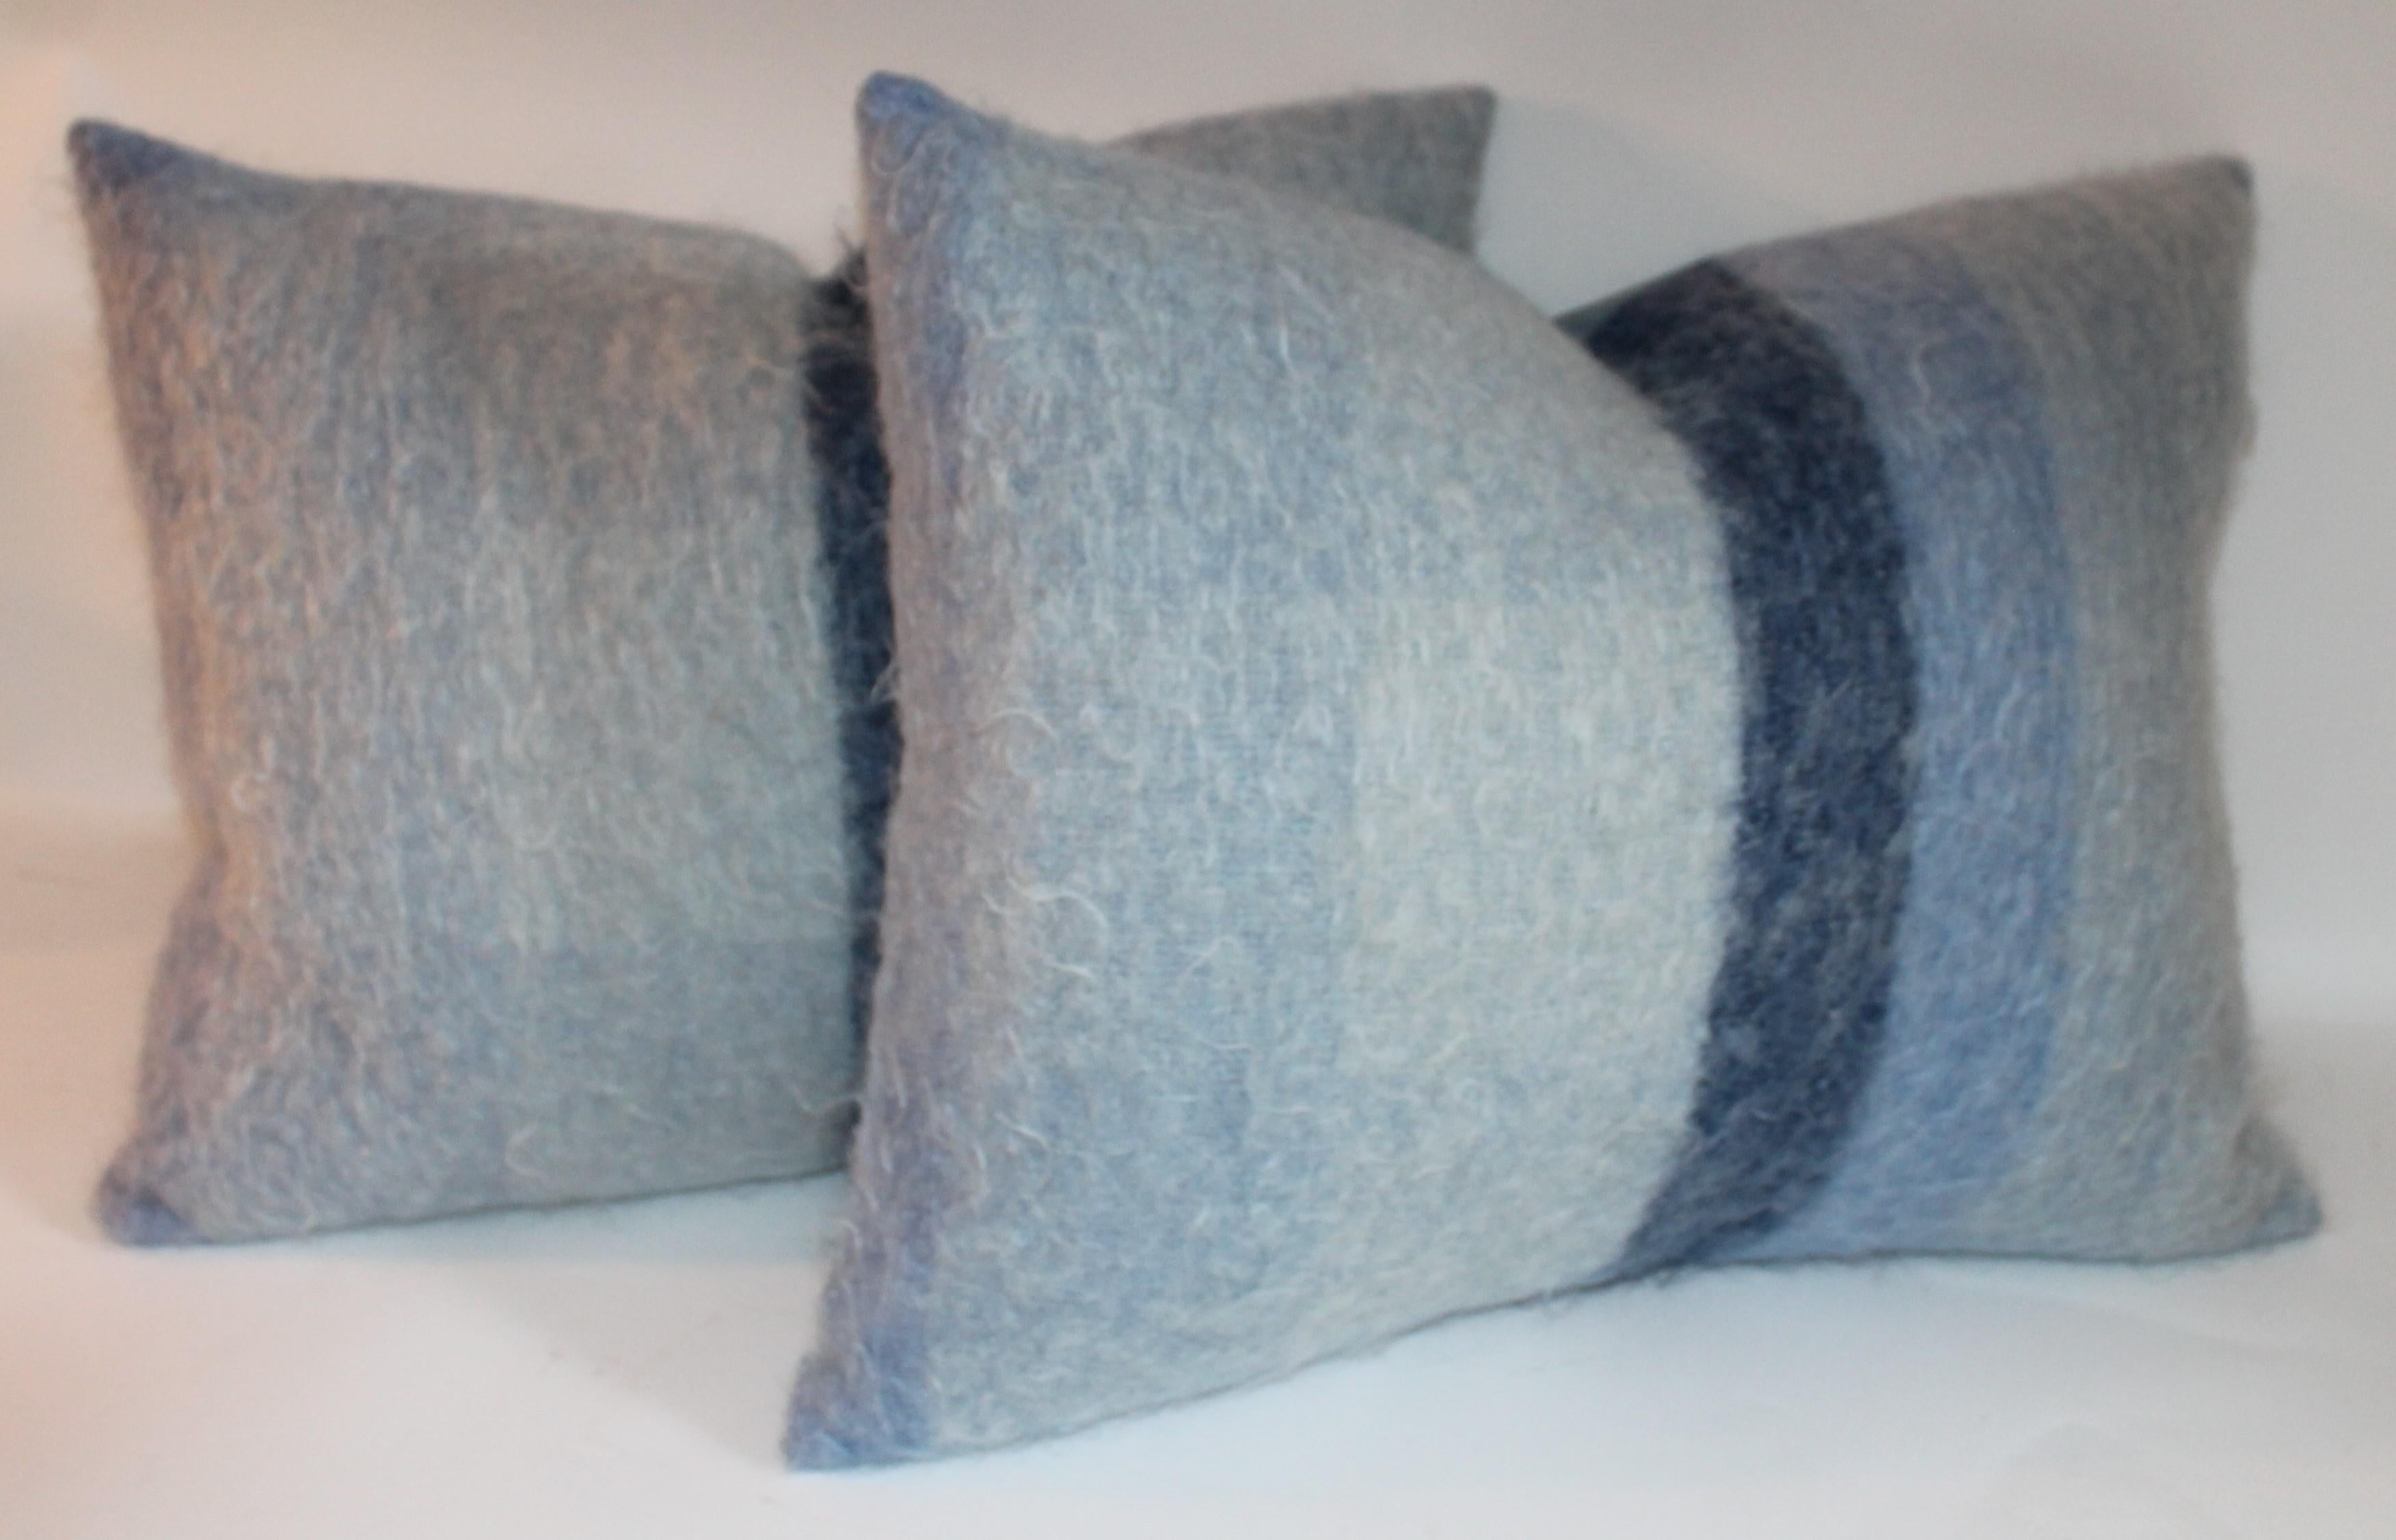 Mohair Pillows in Blues from Vintage Blanket, Pair 1